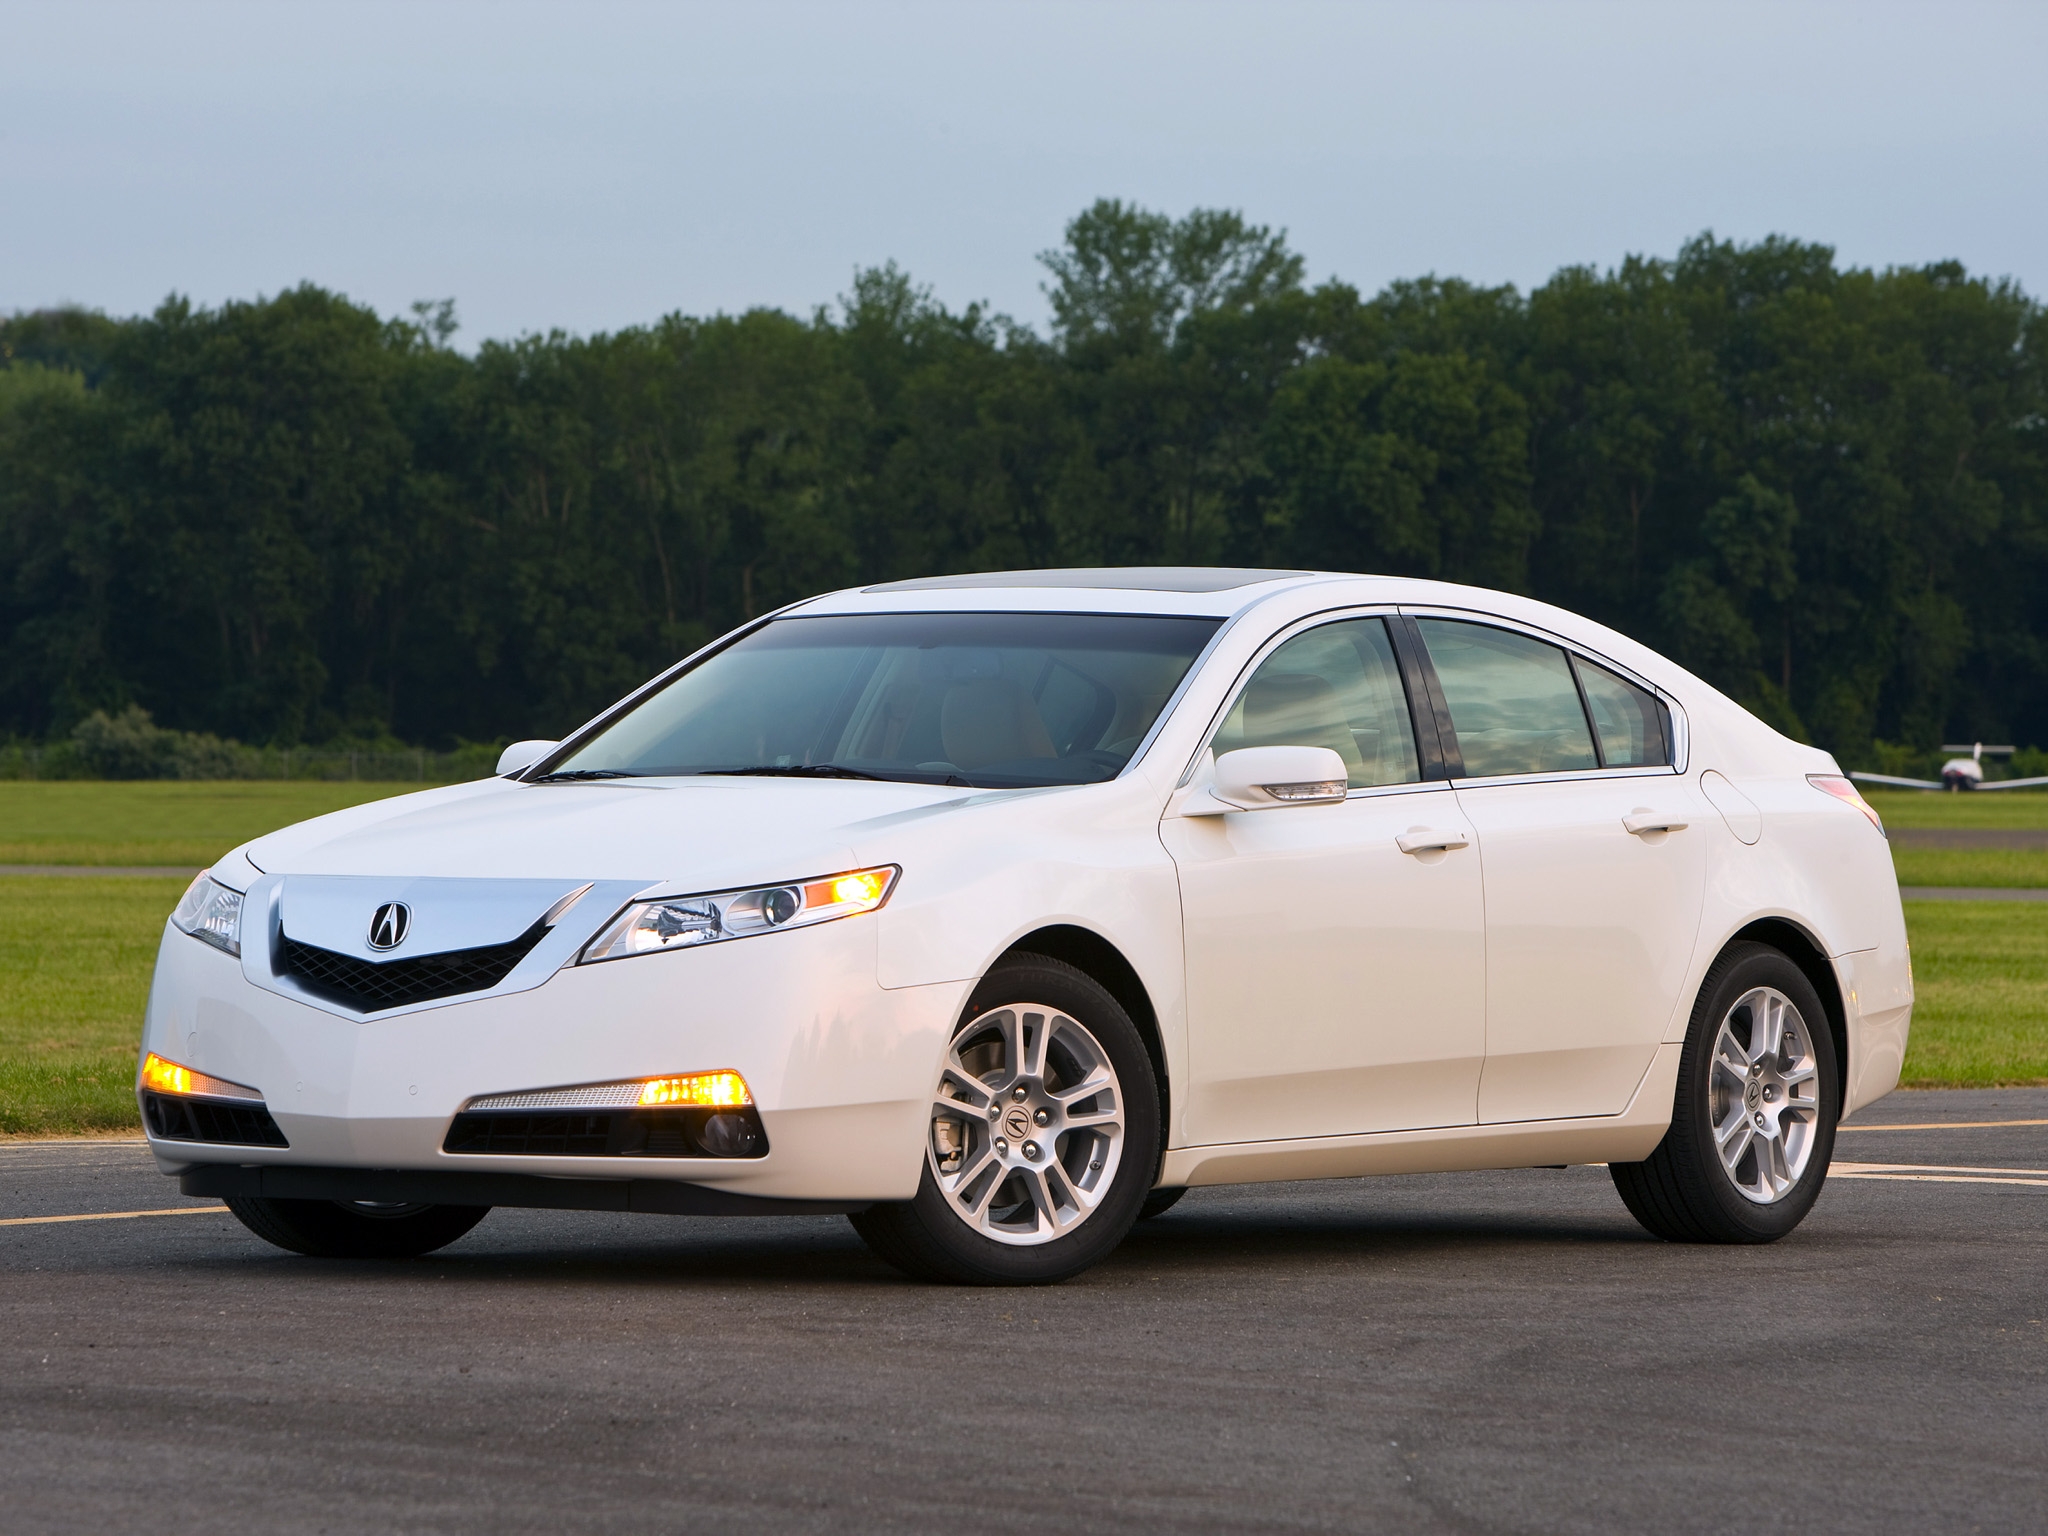 Free HD cars, auto, nature, trees, grass, acura, white, side view, style, akura, 2008, tl